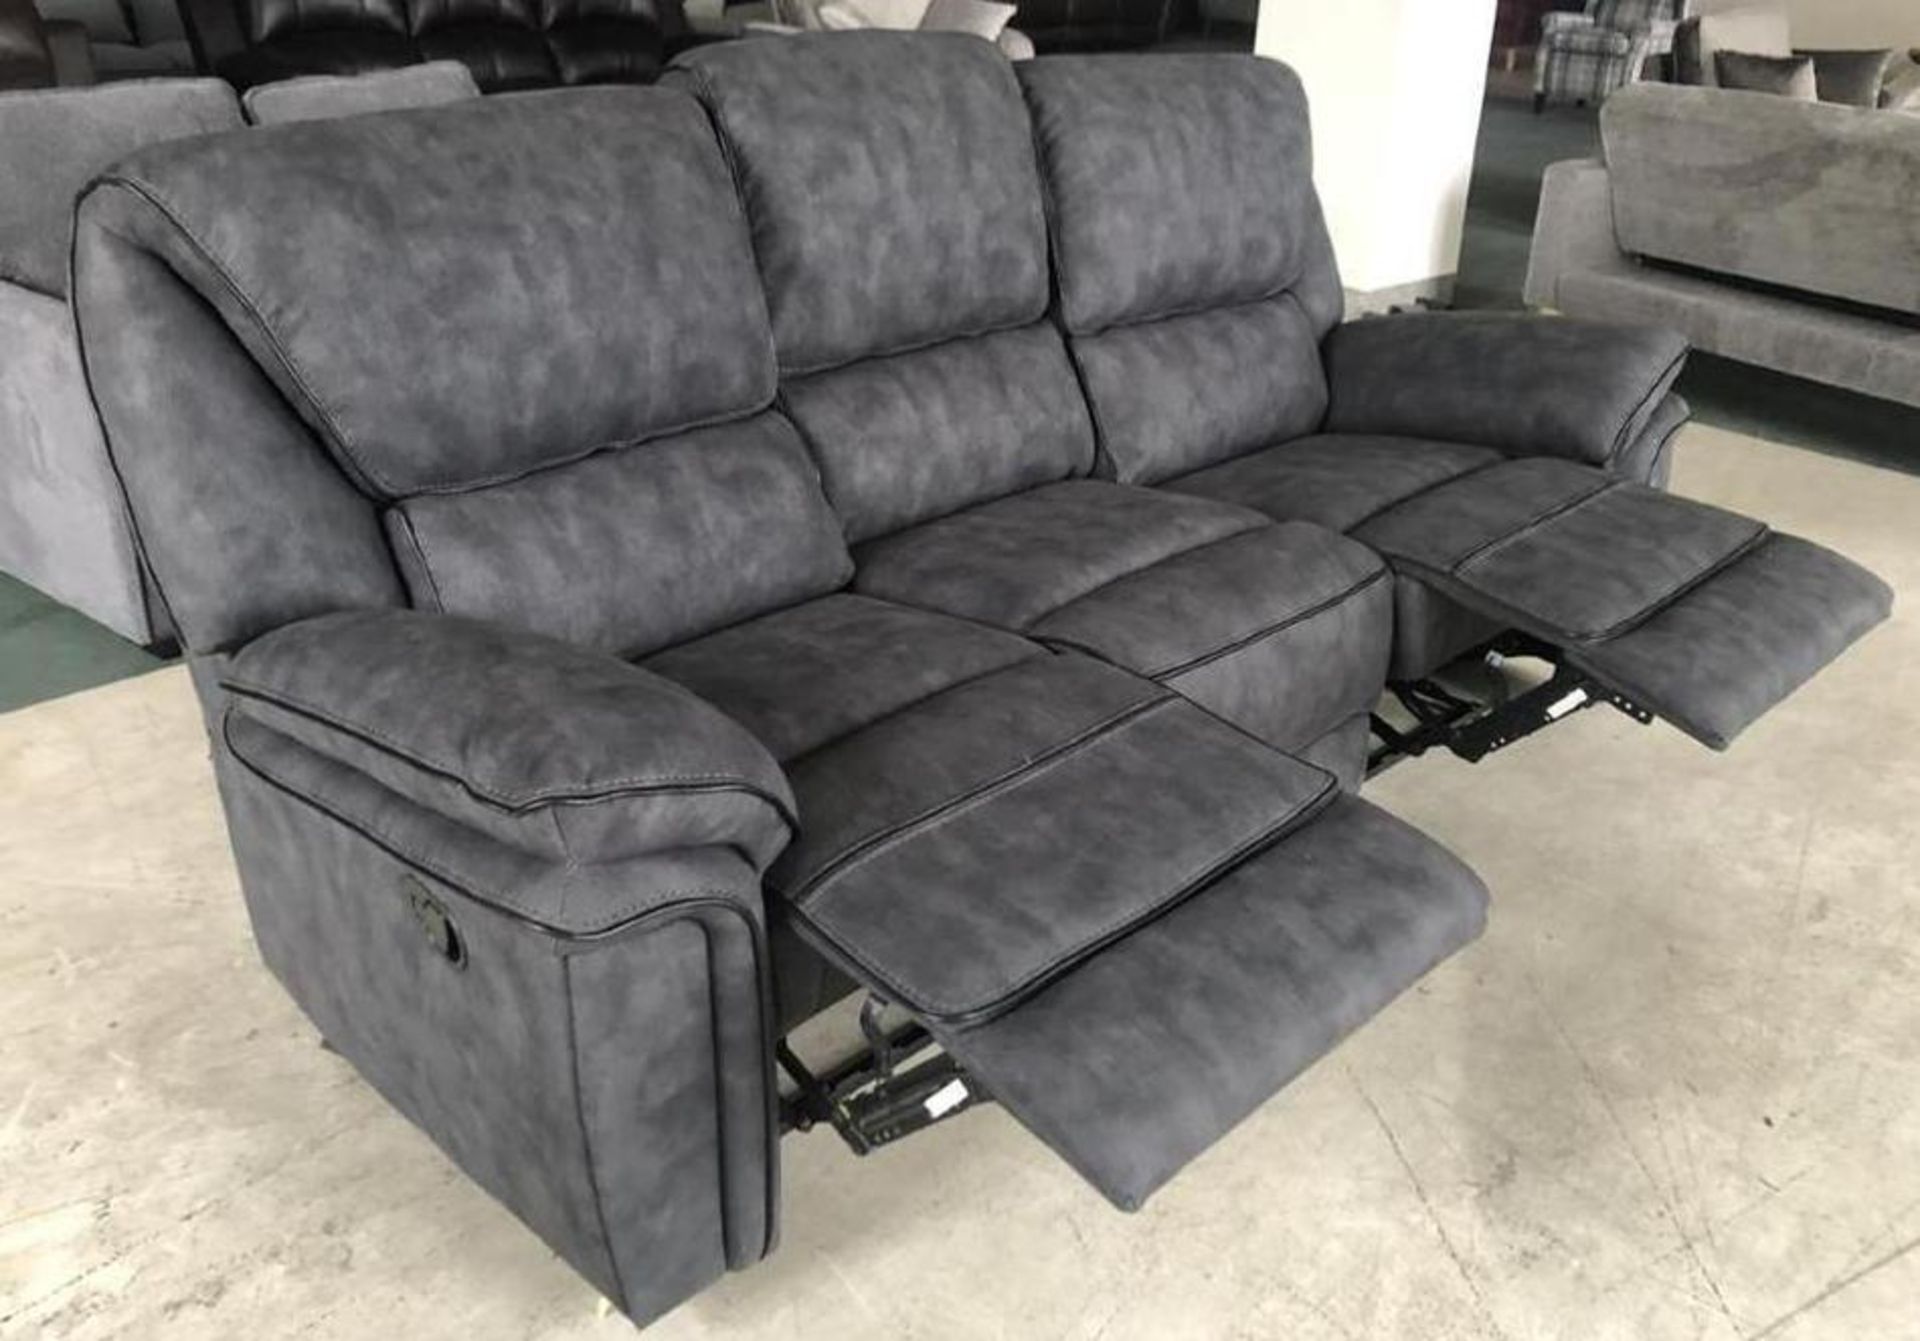 BRAND NEW Boston 3 + 1 + 1 seater fabric manual recliner suite in elephant grey. RRP: £2100